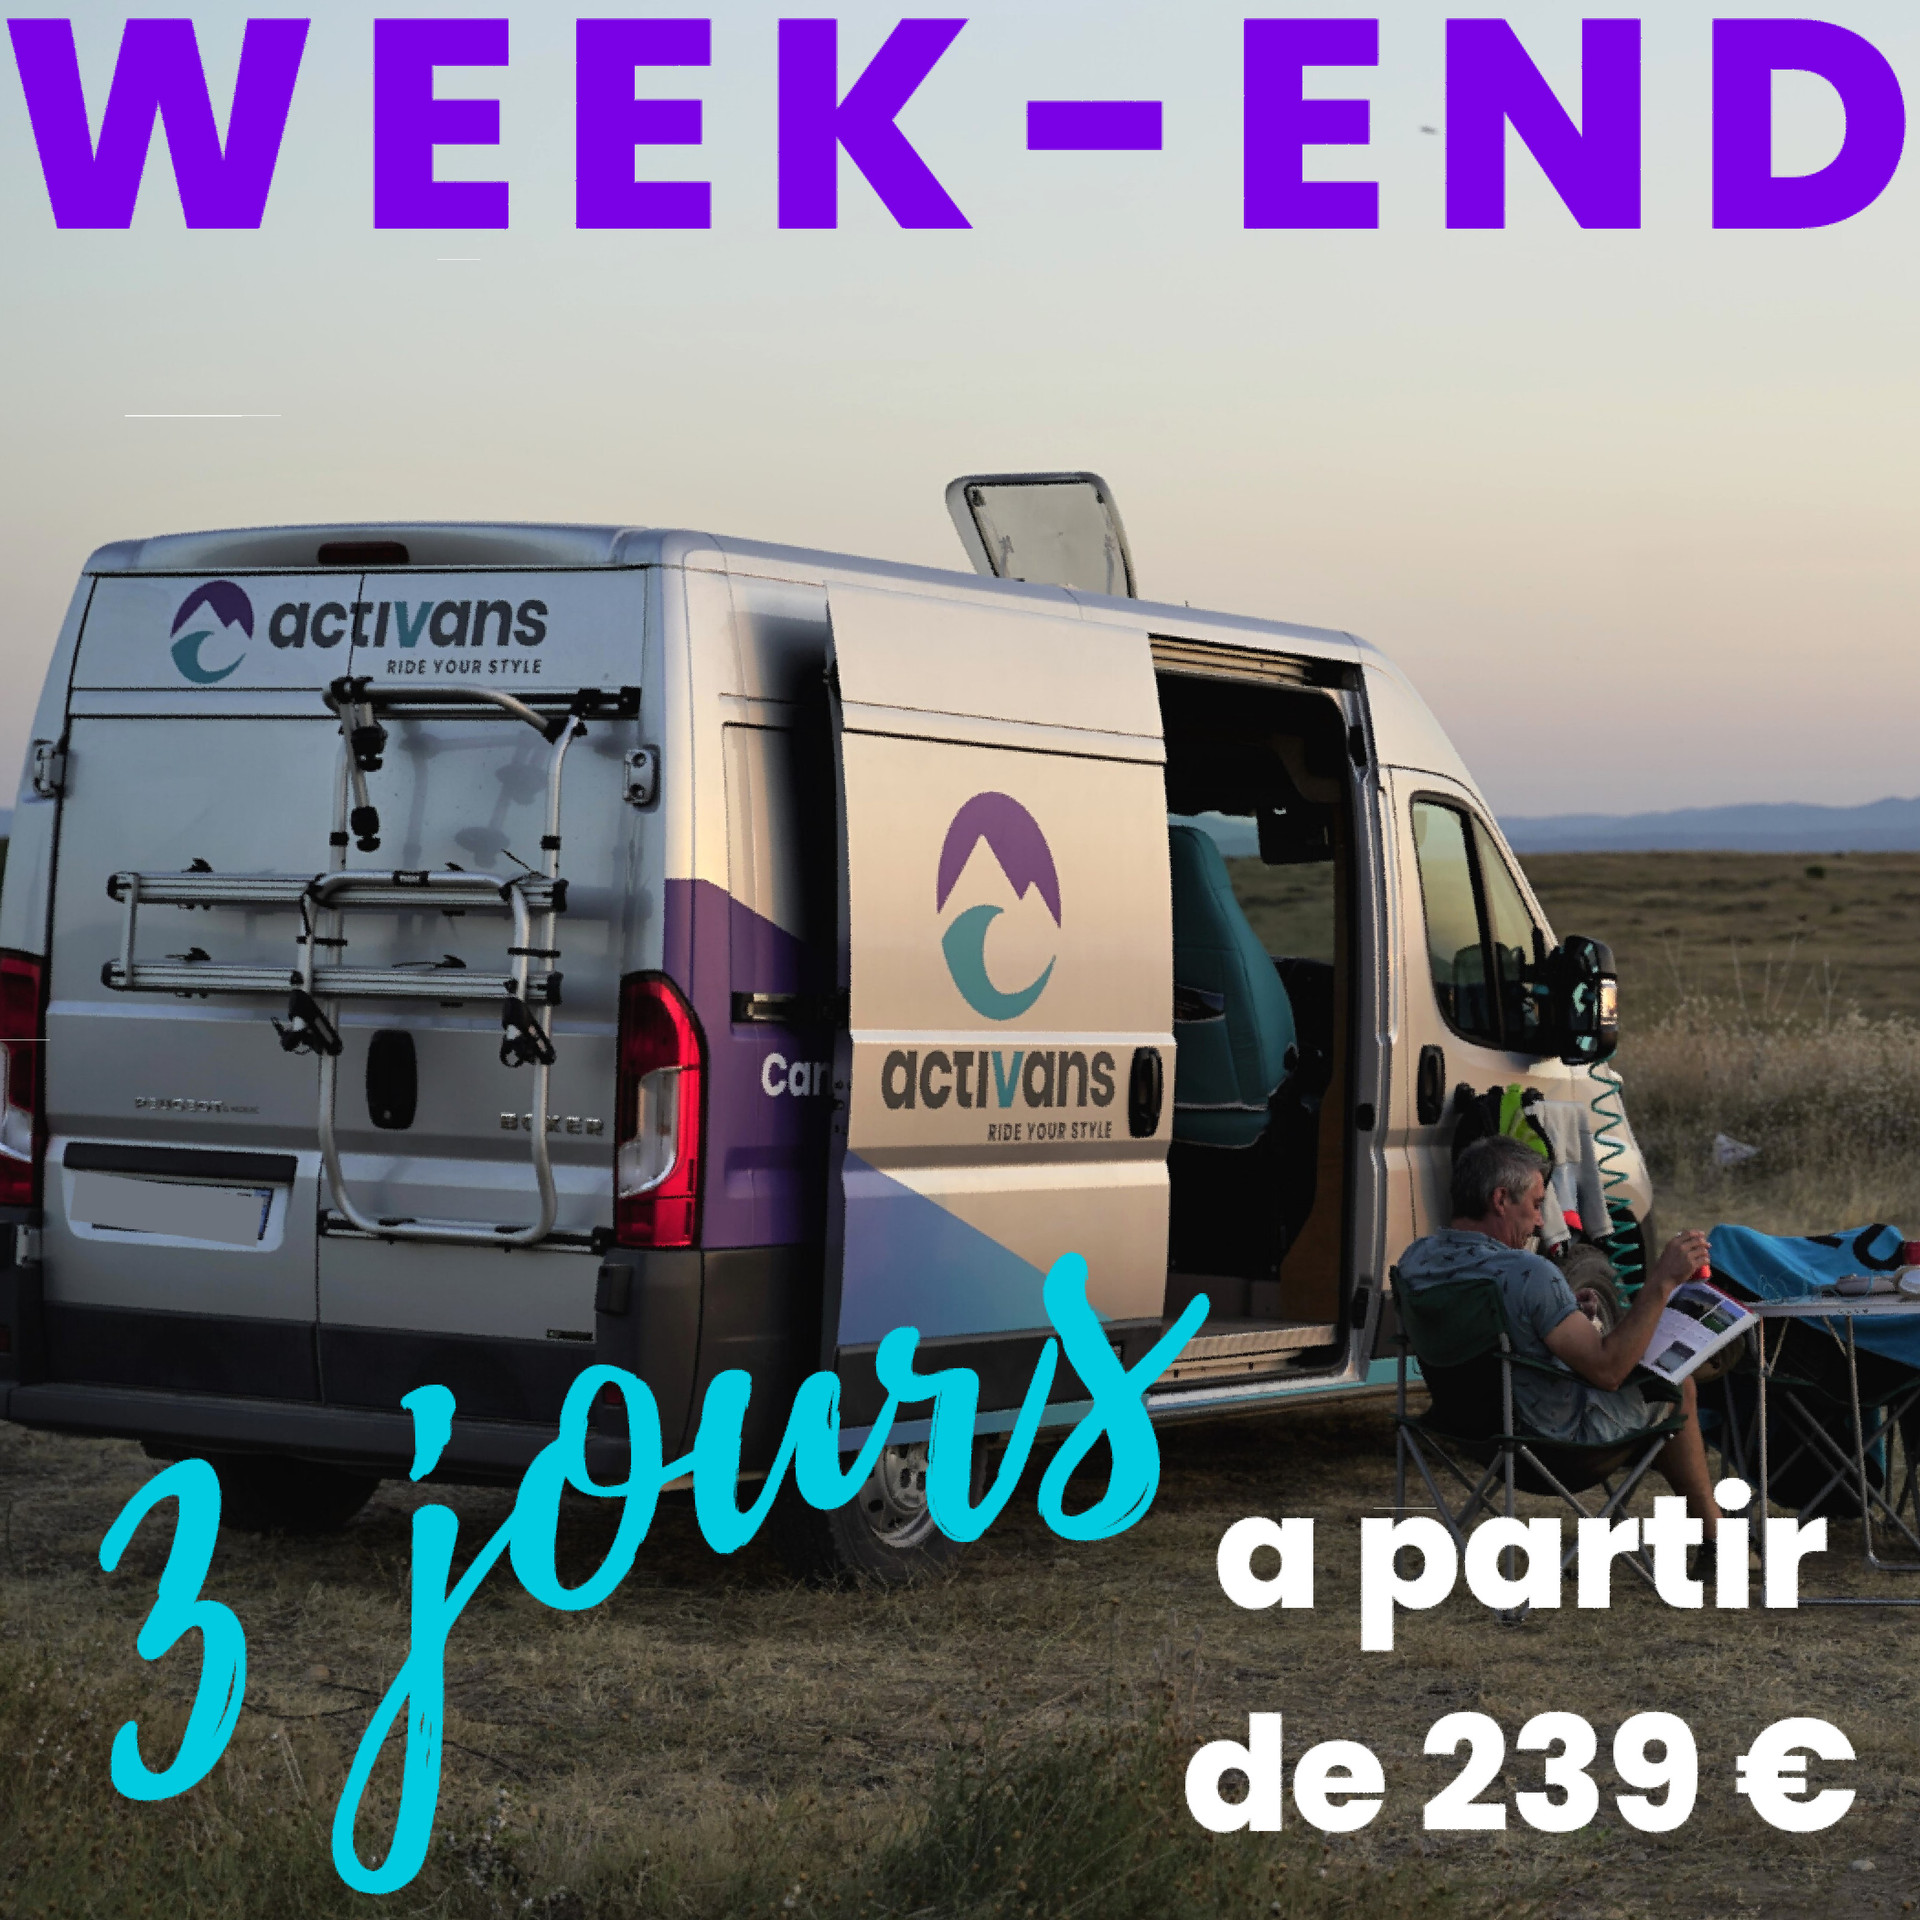 Location camping-car offre weekend Activans Espagne